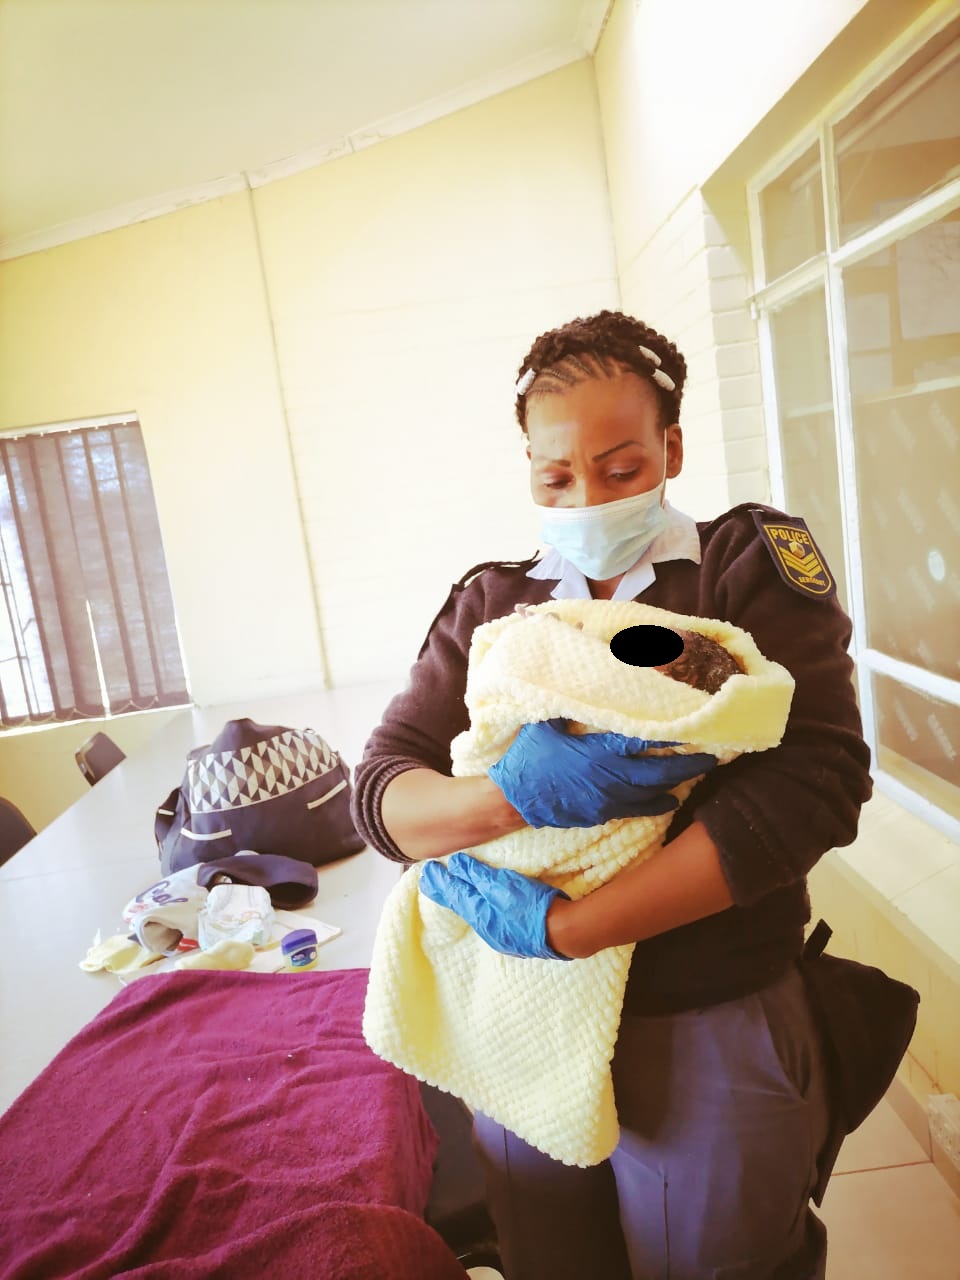 SAPS members have successfully managed to assist a woman to deliver the new born baby girl - Limpopo